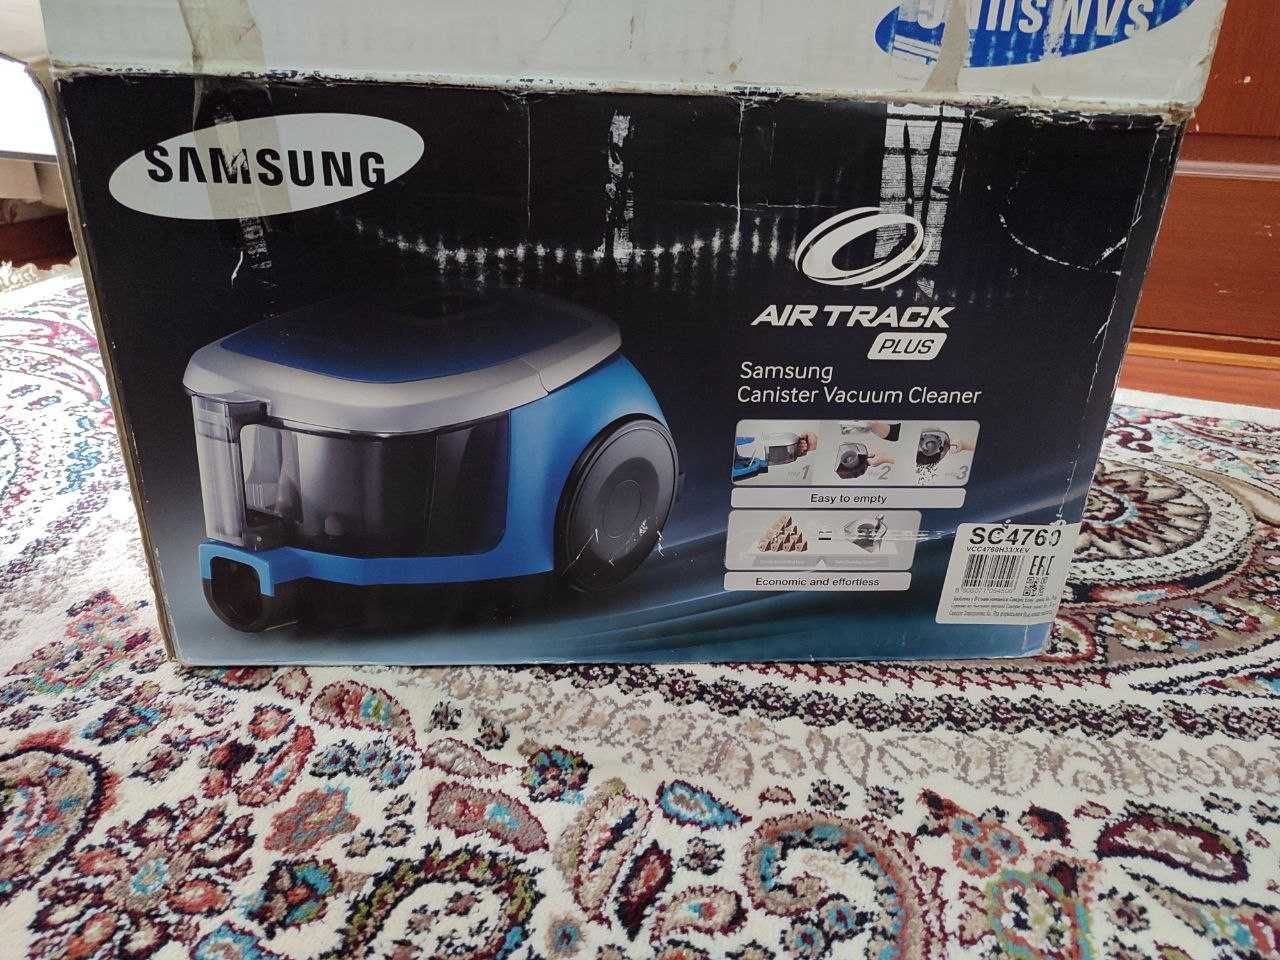 Samsung Canister Vacuum Cleaner SC4760